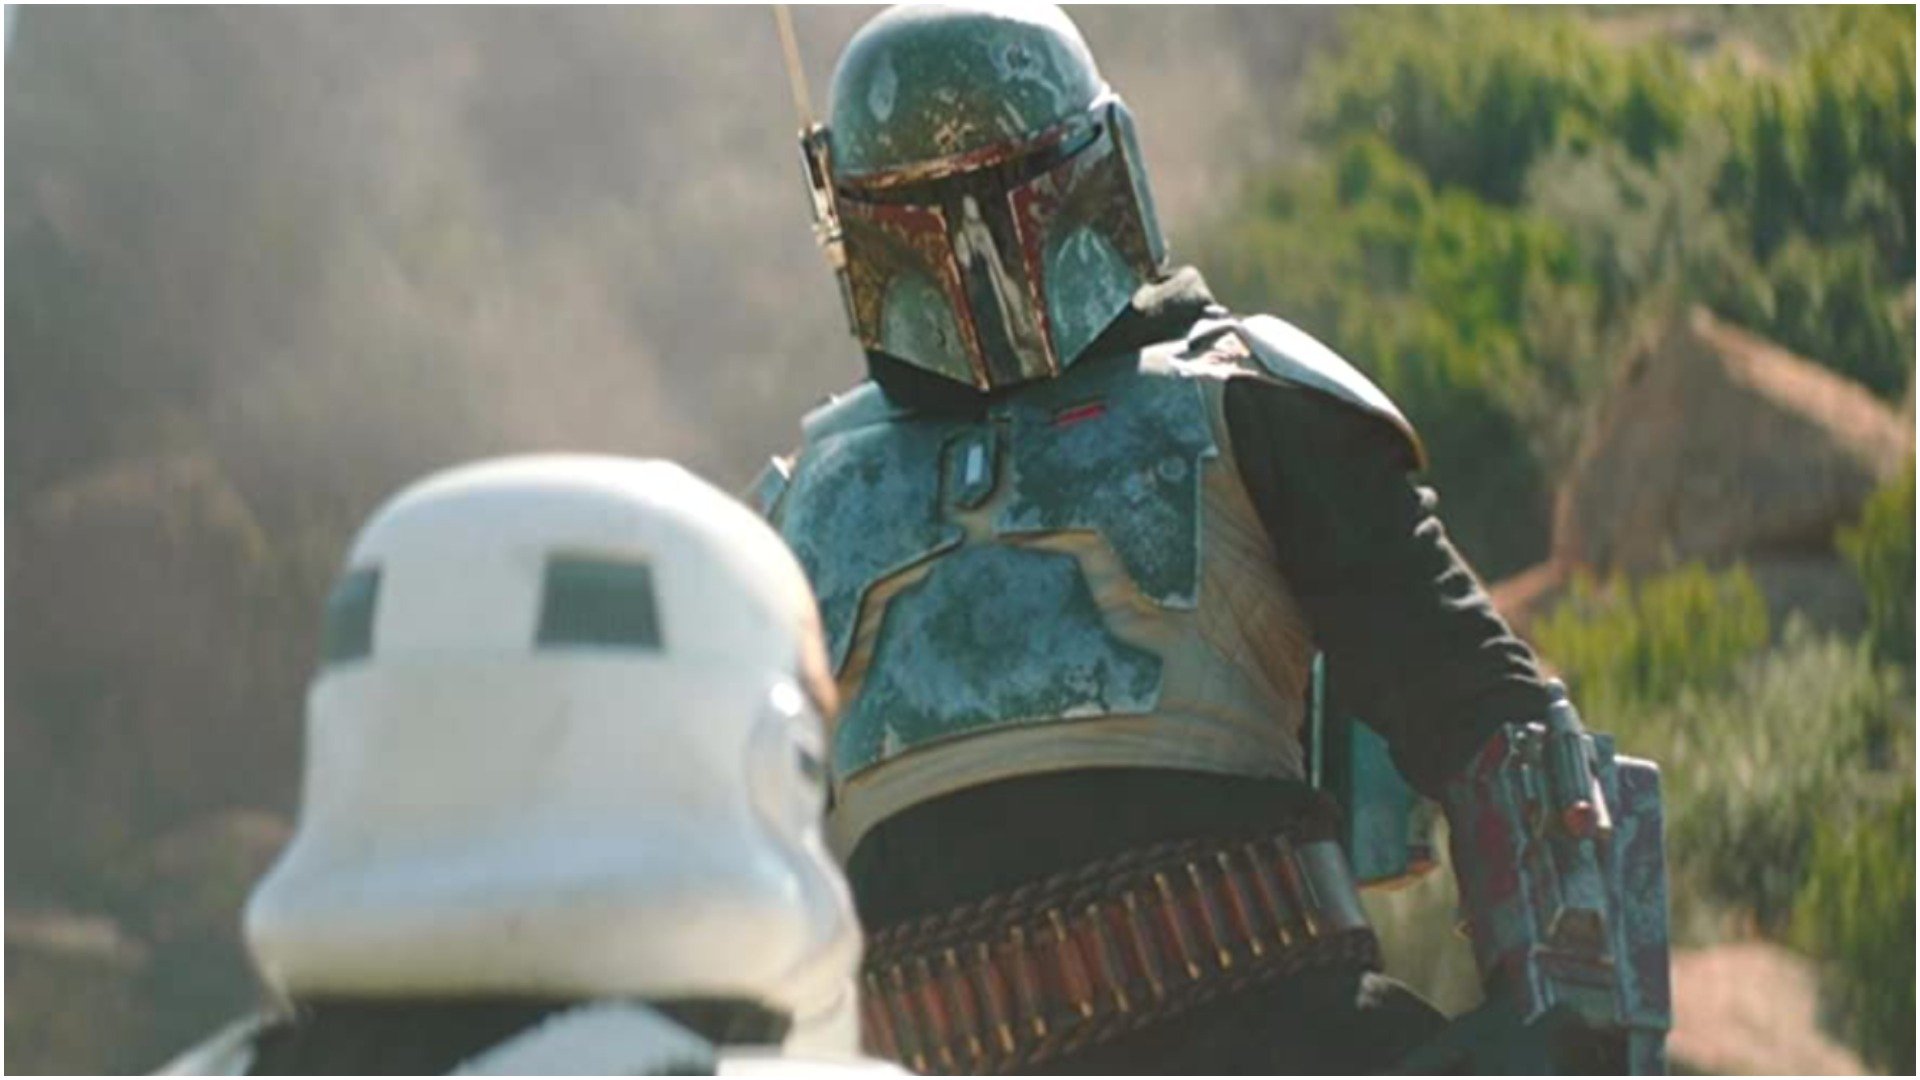 Temuera Morrison confirms The Book of Boba Fett has finished filming